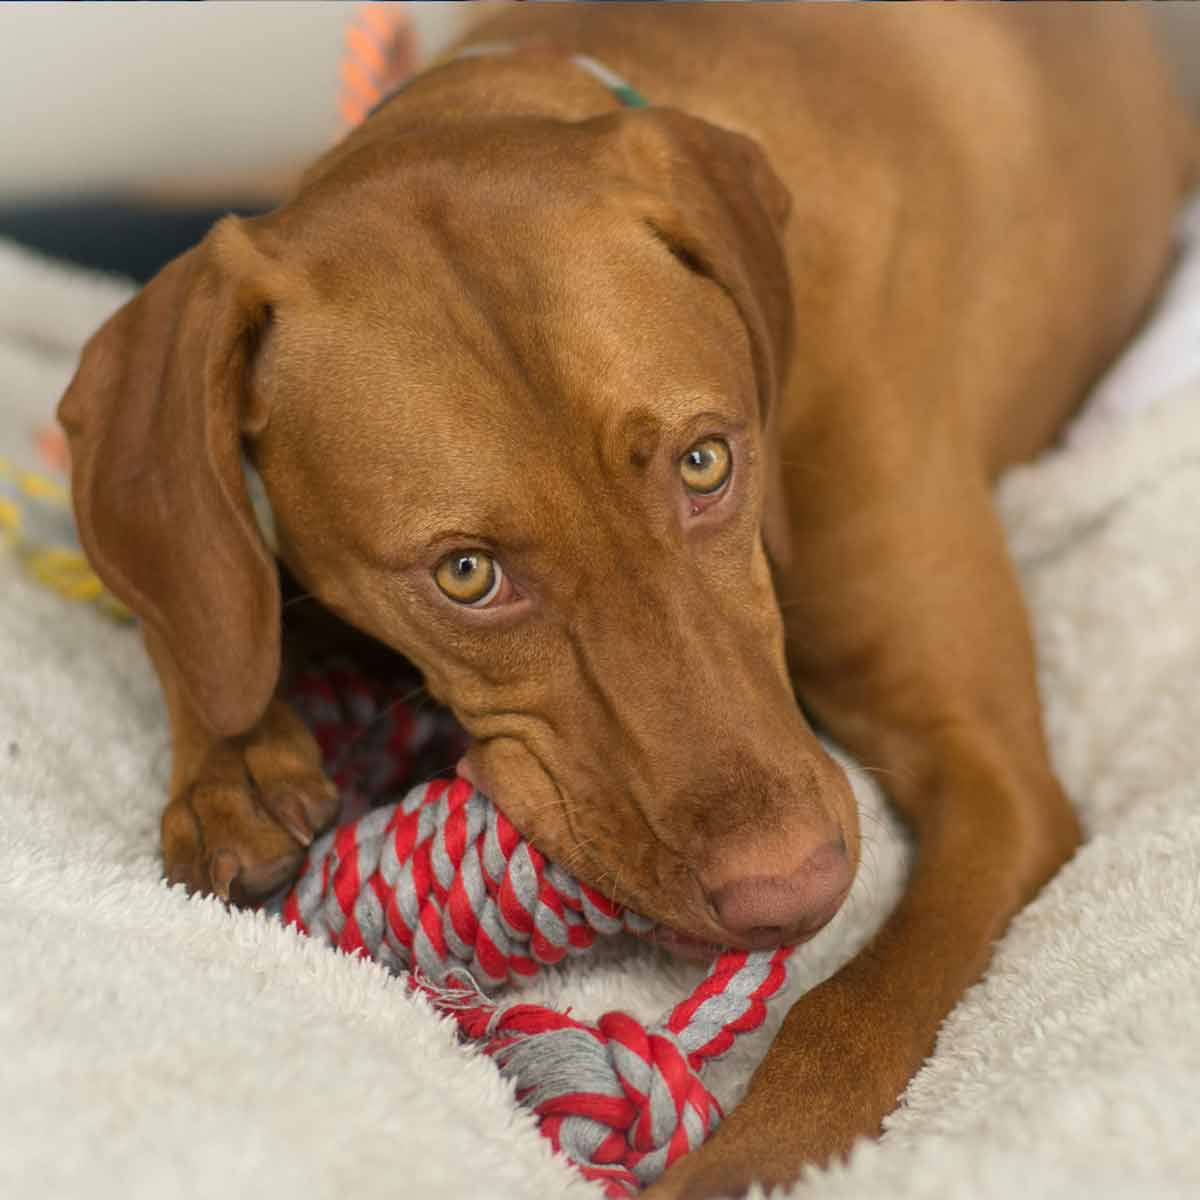 Cute Vizsla is chewing on Spiral Tug Of War Dog Rope Toy